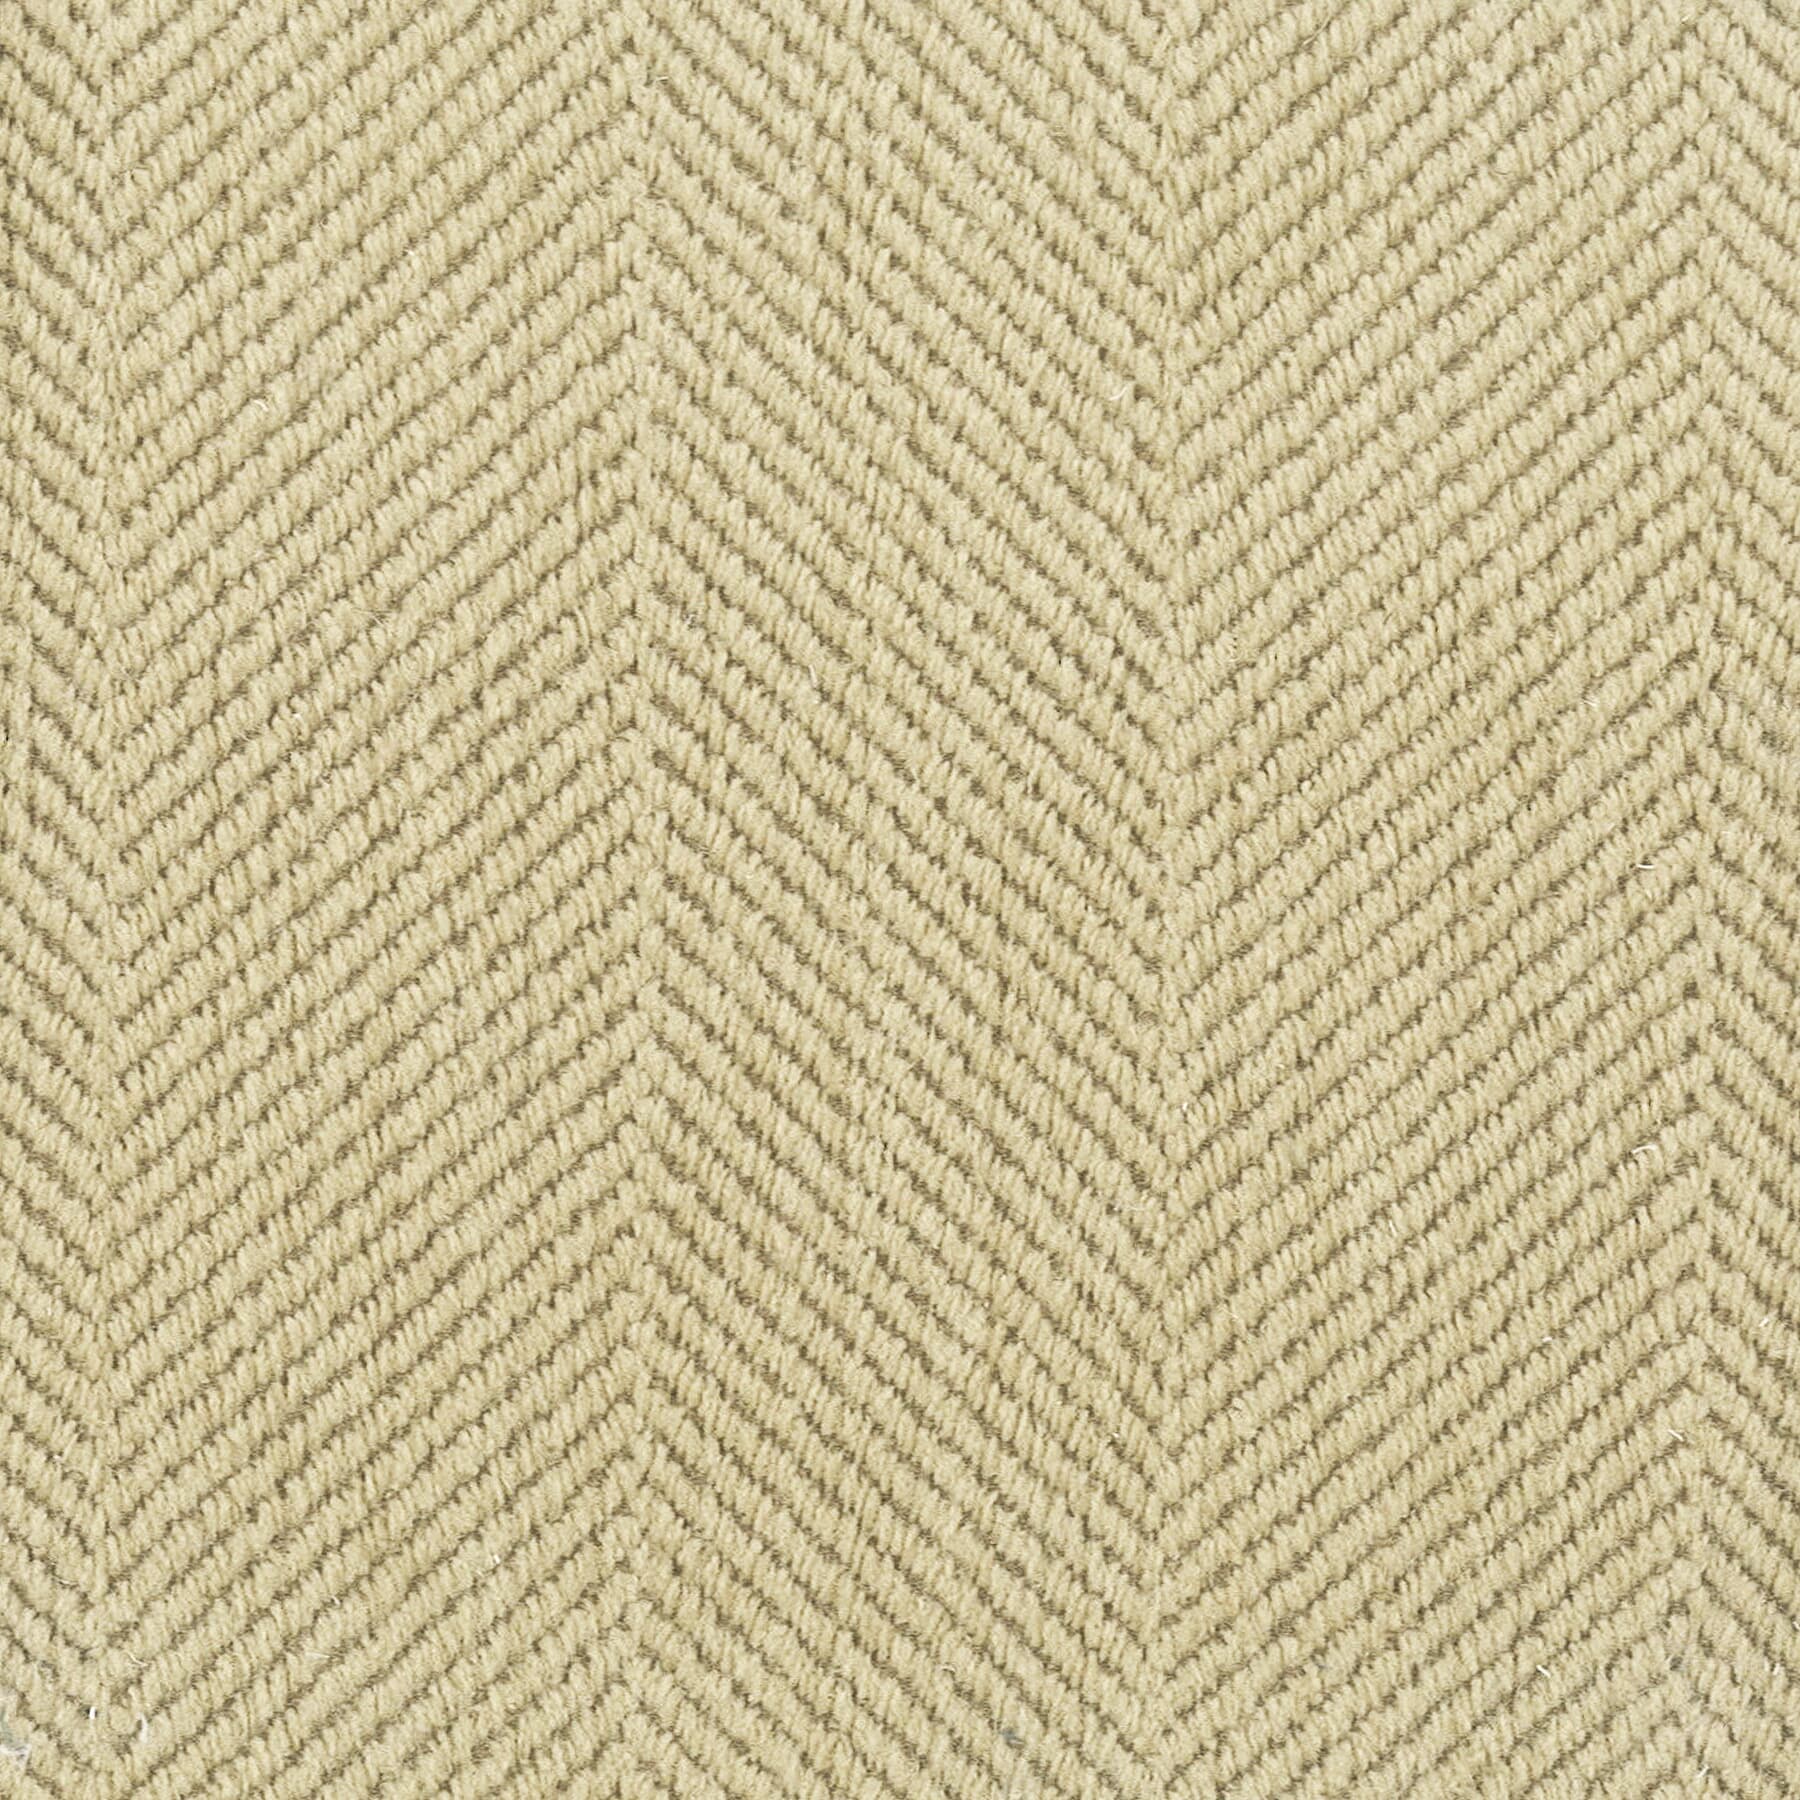 Chevron 1 Taupe by Stout Fabric